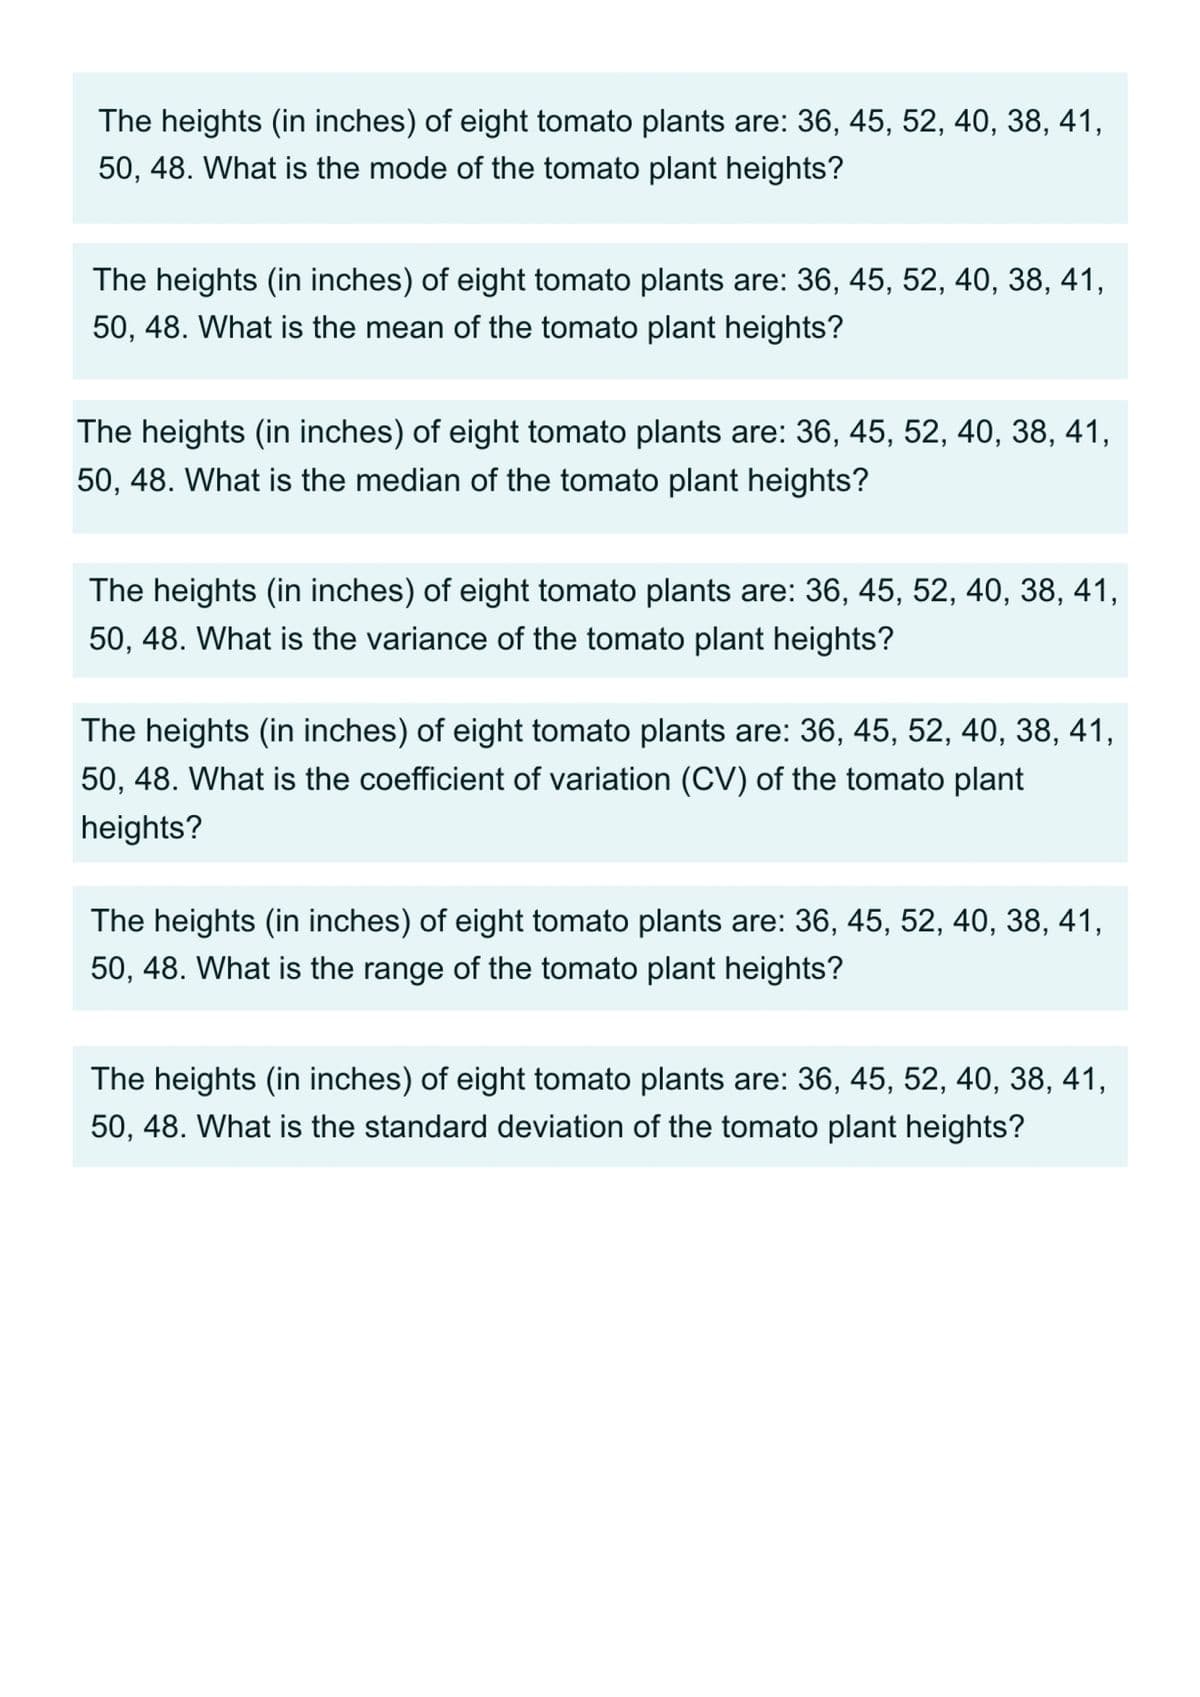 The heights (in inches) of eight tomato plants are: 36, 45, 52, 40, 38, 41,
50, 48. What is the mode of the tomato plant heights?
The heights (in inches) of eight tomato plants are: 36, 45, 52, 40, 38, 41,
50, 48. What is the mean of the tomato plant heights?
The heights (in inches) of eight tomato plants are: 36, 45, 52, 40, 38, 41,
50, 48. What is the median of the tomato plant heights?
The heights (in inches) of eight tomato plants are: 36, 45, 52, 40, 38, 41,
50, 48. What is the variance of the tomato plant heights?
The heights (in inches) of eight tomato plants are: 36, 45, 52, 40, 38, 41,
50, 48. What is the coefficient of variation (CV) of the tomato plant
heights?
The heights (in inches) of eight tomato plants are: 36, 45, 52, 40, 38, 41,
50, 48. What is the range of the tomato plant heights?
The heights (in inches) of eight tomato plants are: 36, 45, 52, 40, 38, 41,
50, 48. What is the standard deviation of the tomato plant heights?